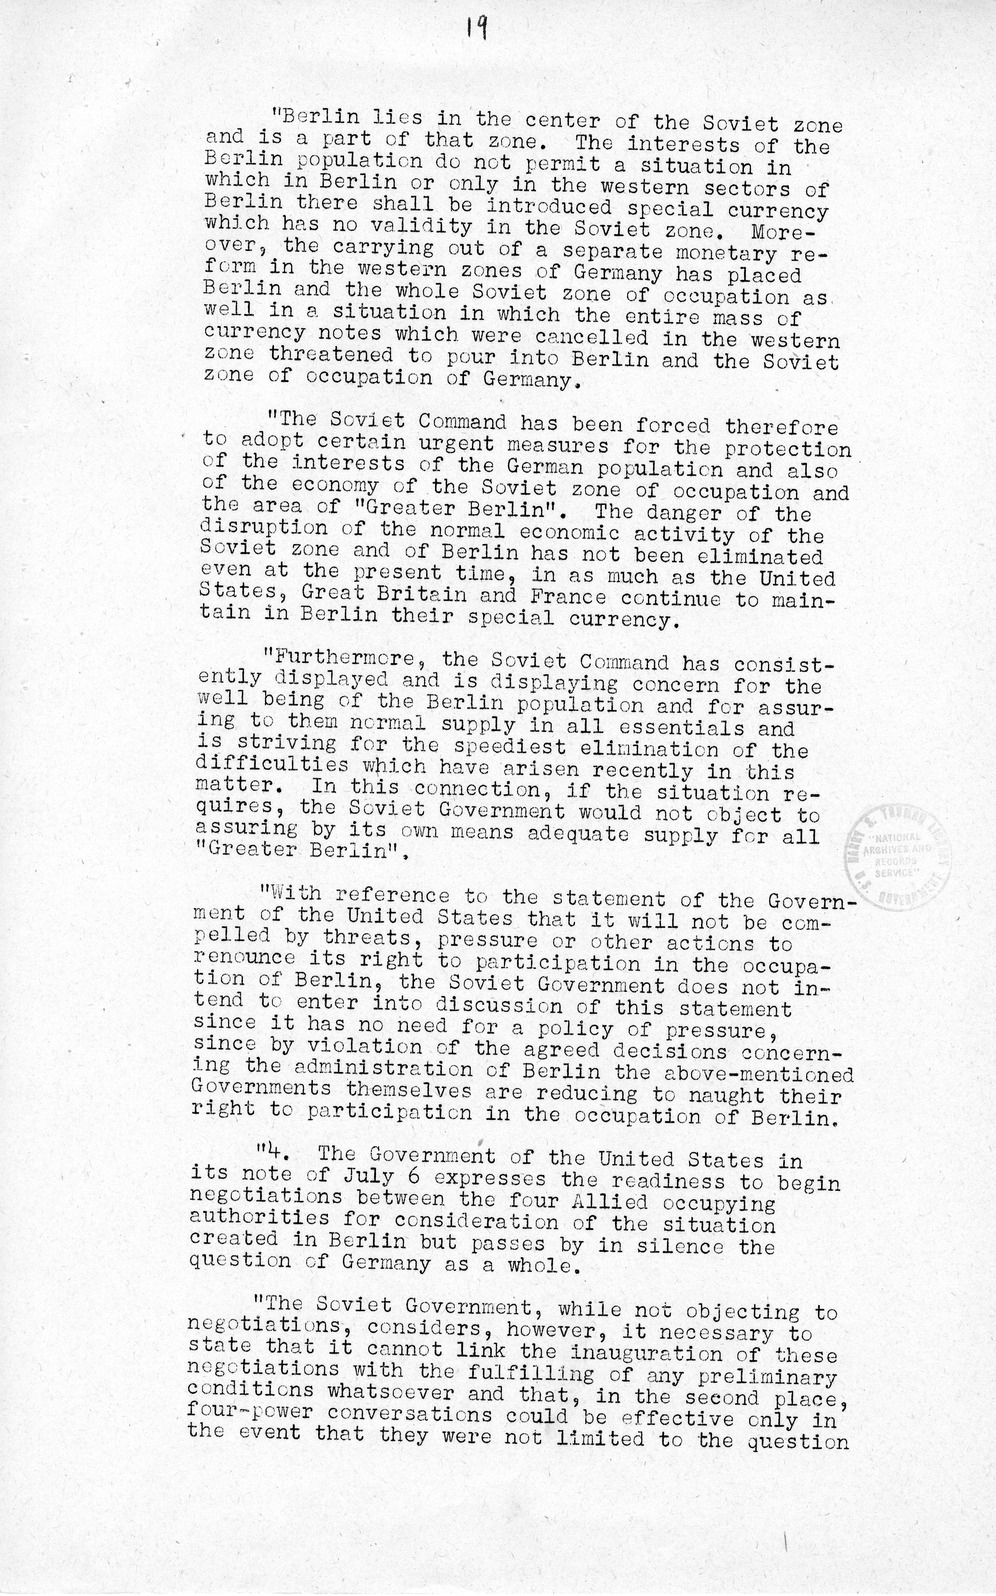 Press Release, The Berlin Crisis: A Report on the Moscow Discussions, 1948